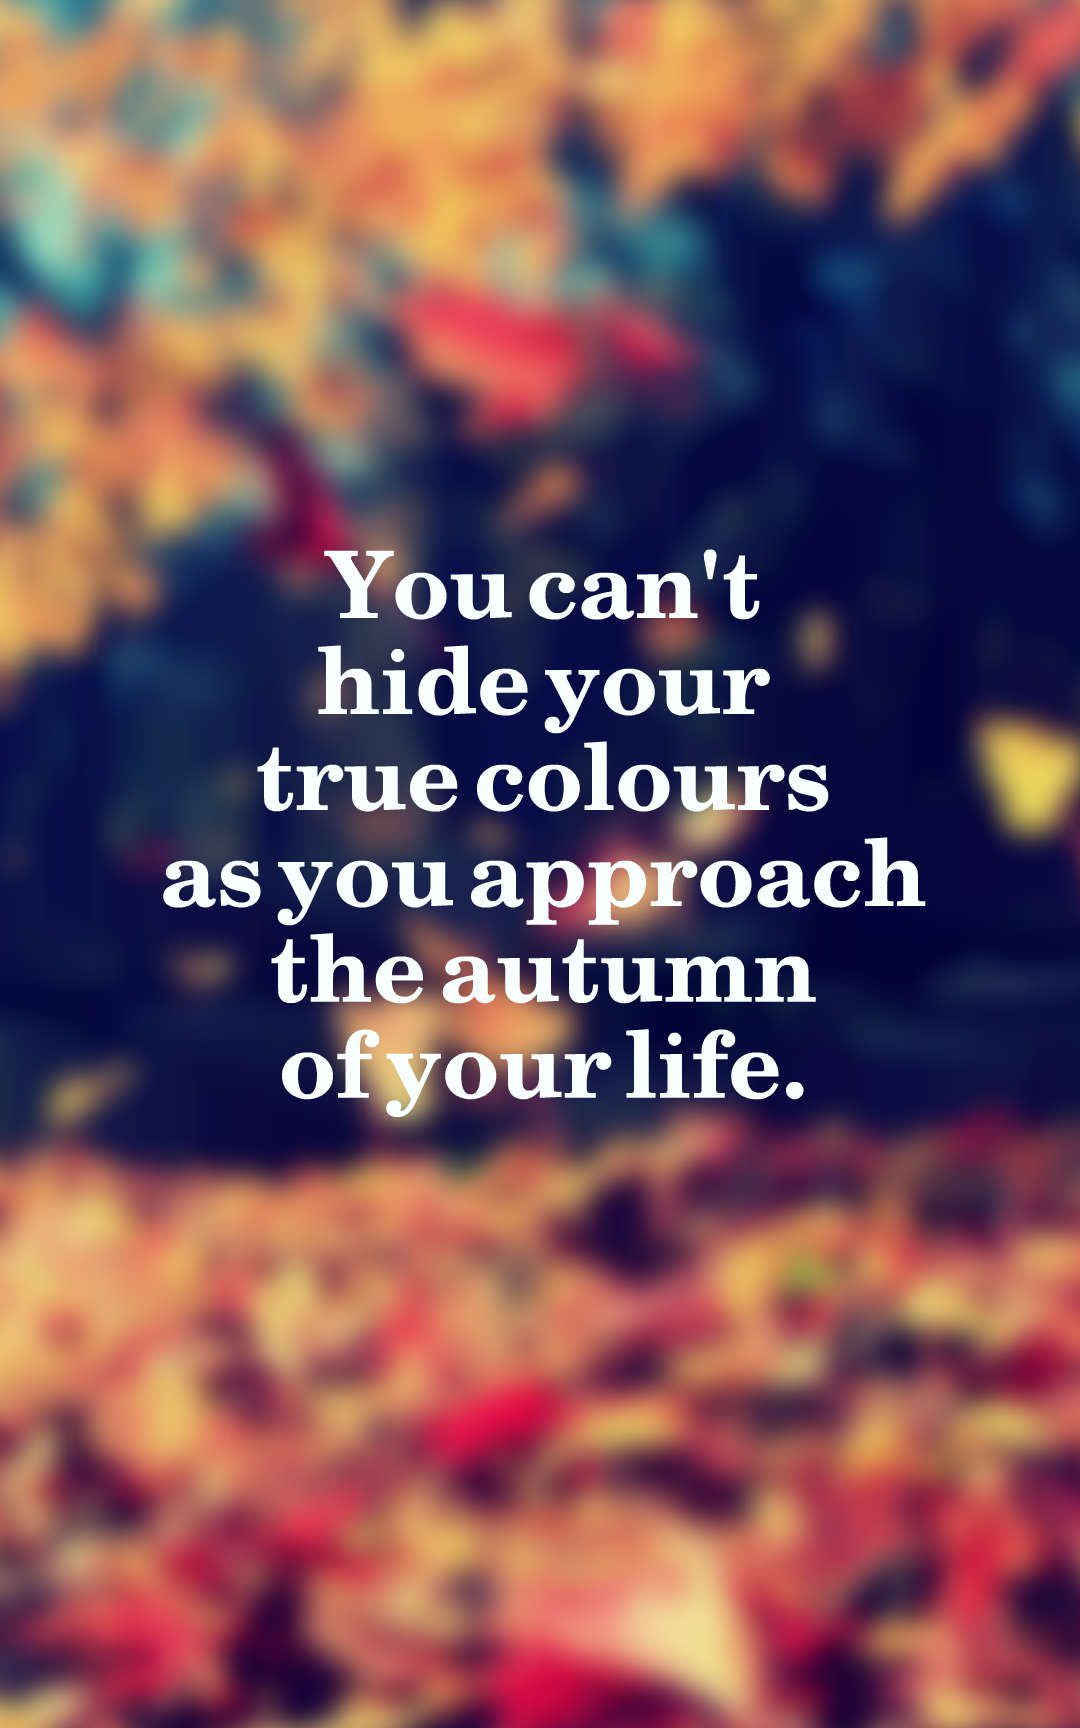 You can't hide your true colours as you approach the autumn of your life.